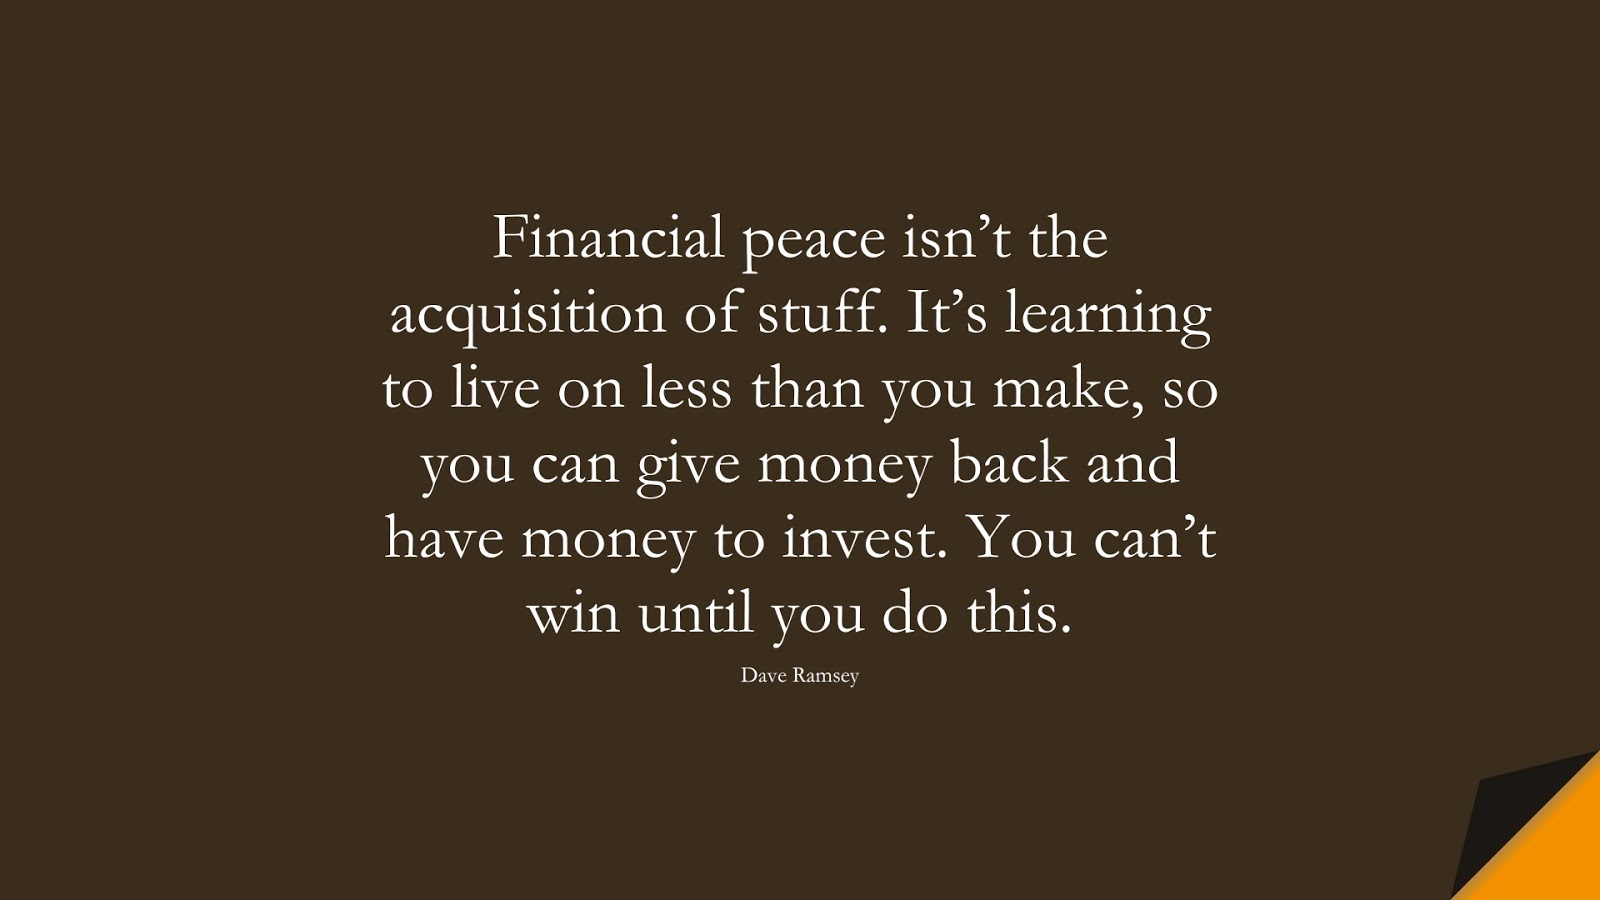 Financial peace isn’t the acquisition of stuff. It’s learning to live on less than you make, so you can give money back and have money to invest. You can’t win until you do this. (Dave Ramsey);  #MoneyQuotes